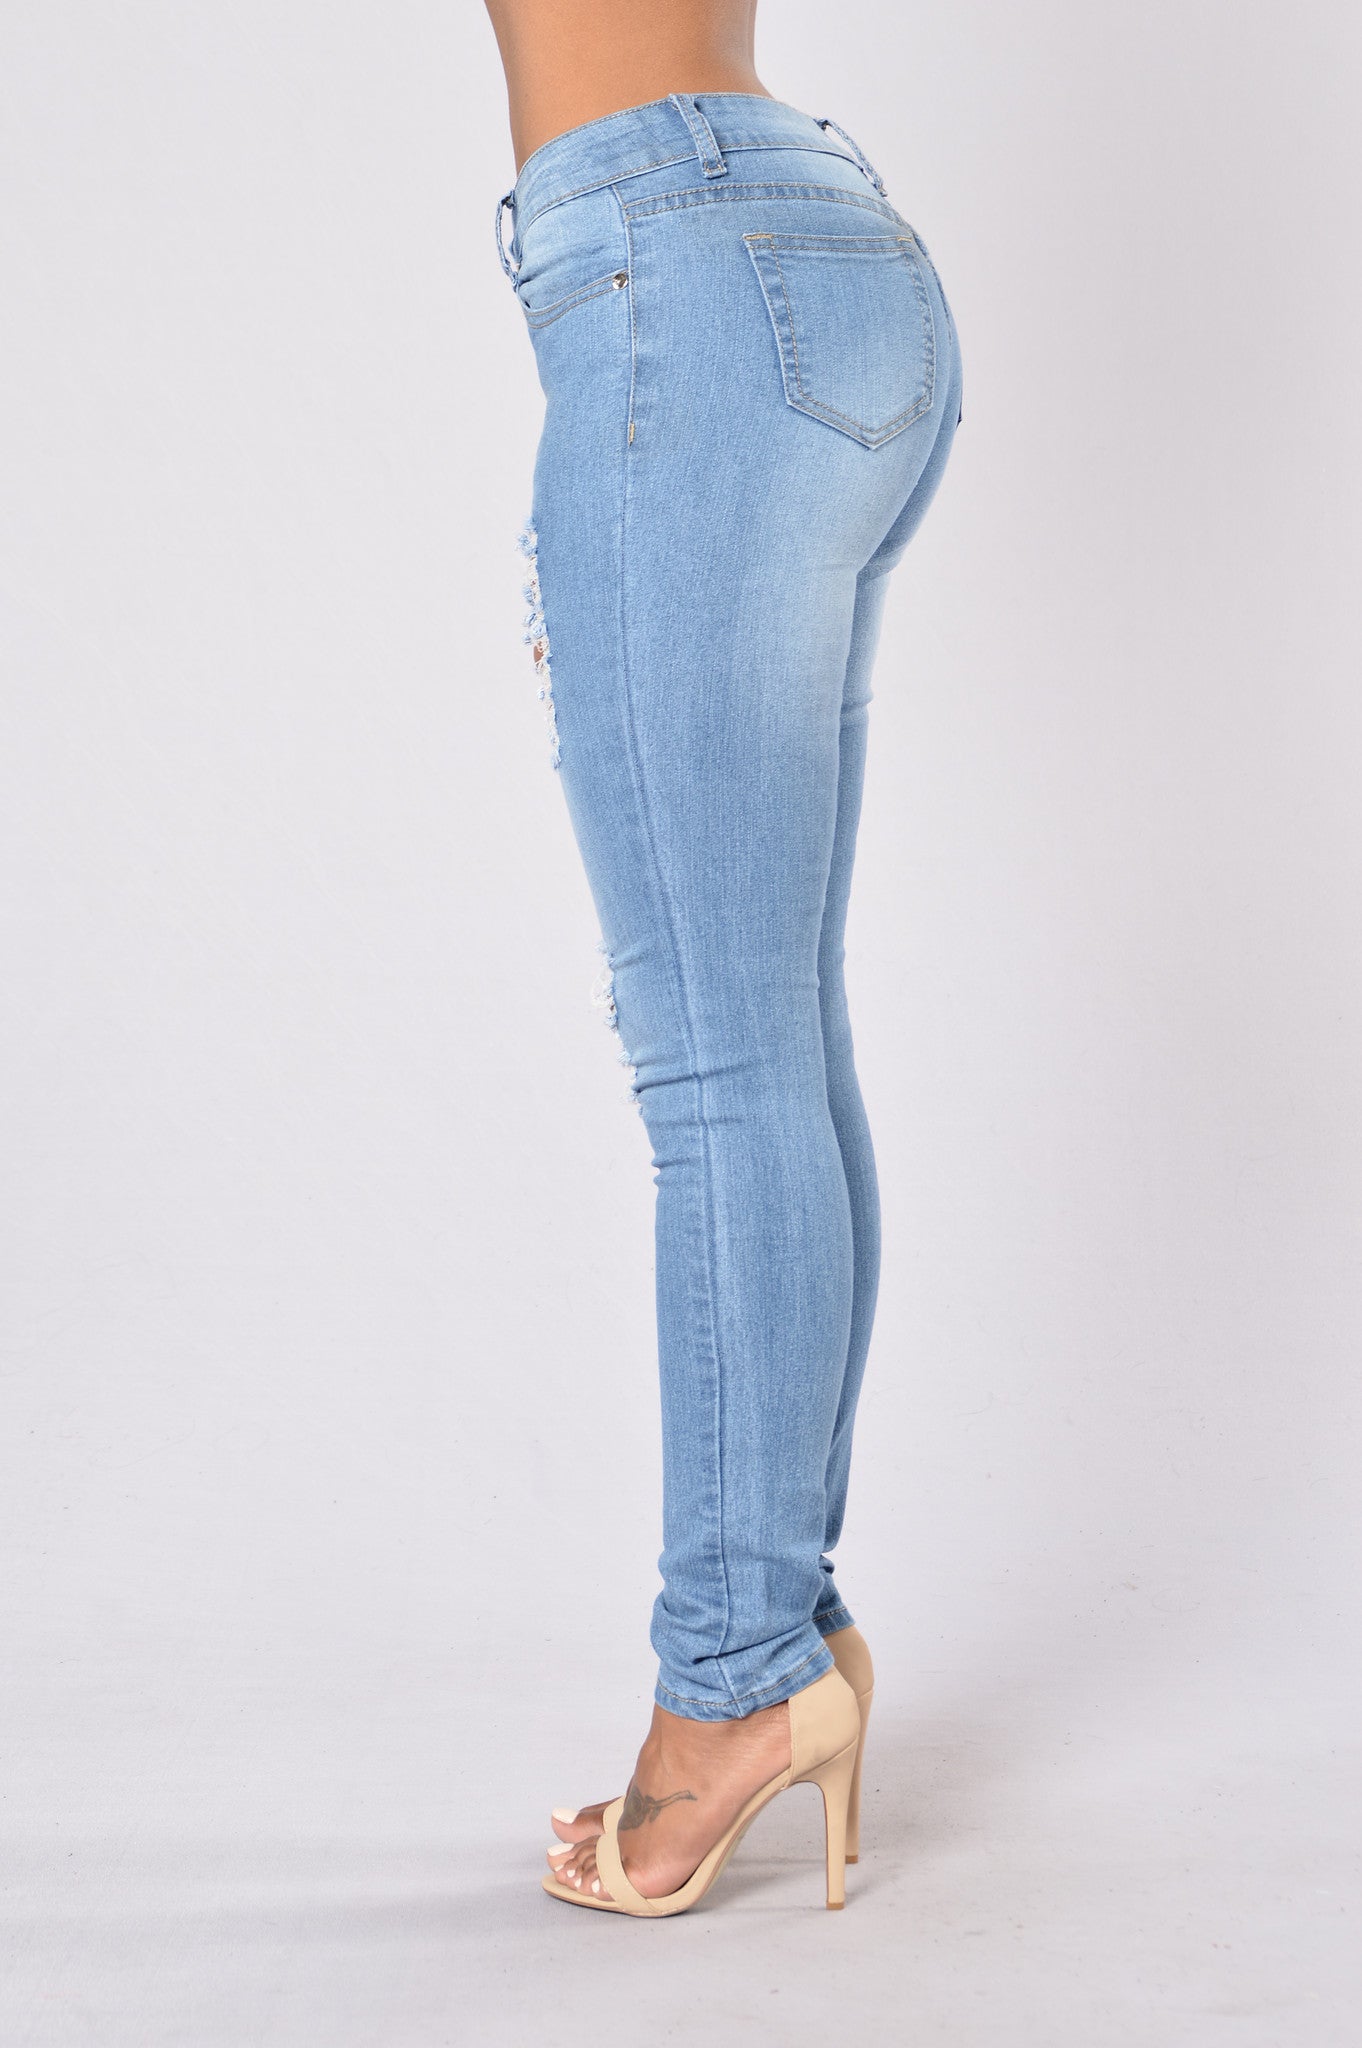 Not Sorry Jeans - Medium Wash